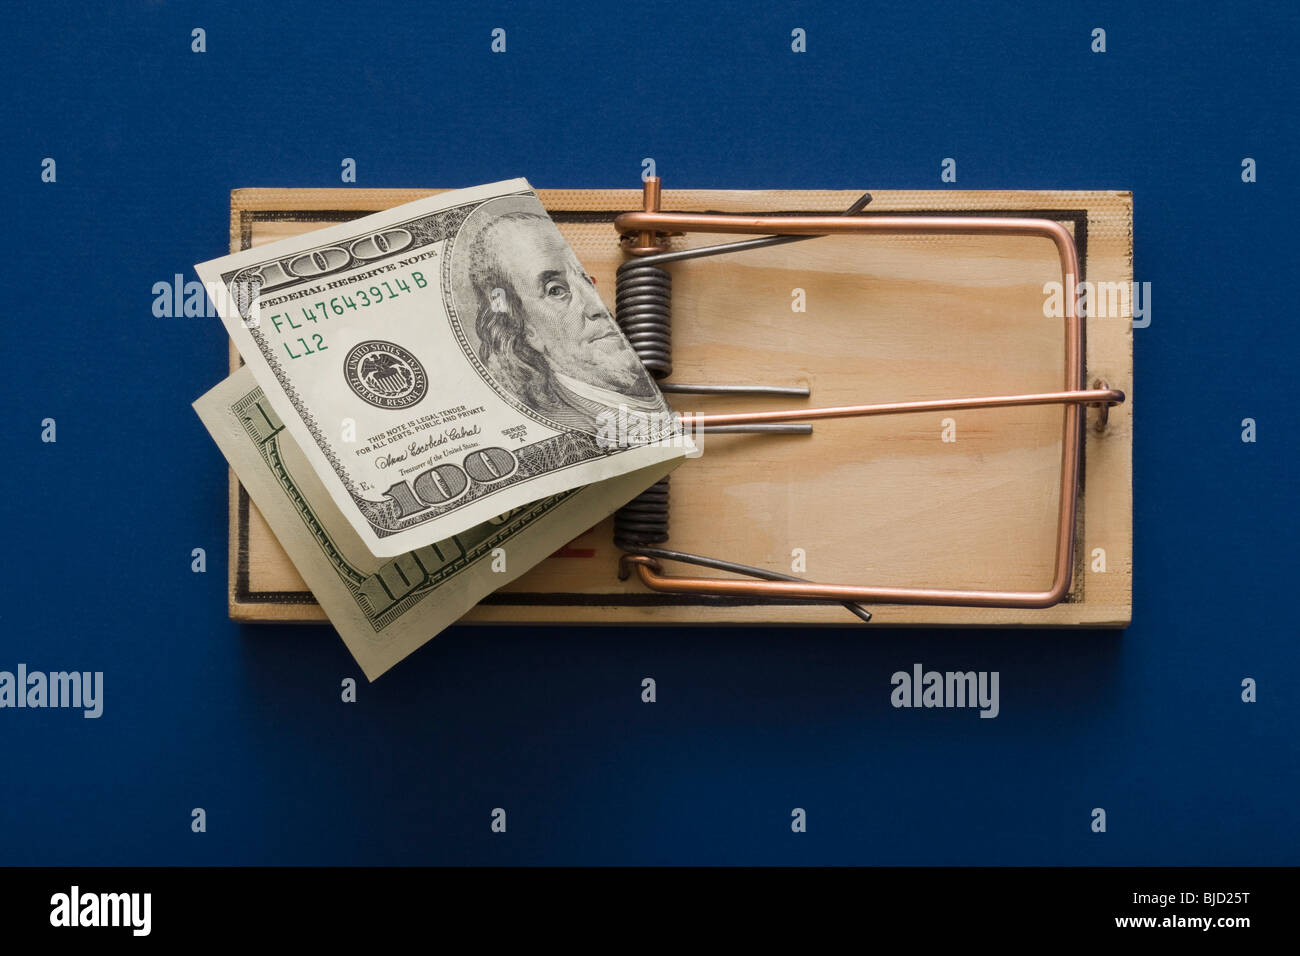 Mouse trap with money as bait. Stock Photo